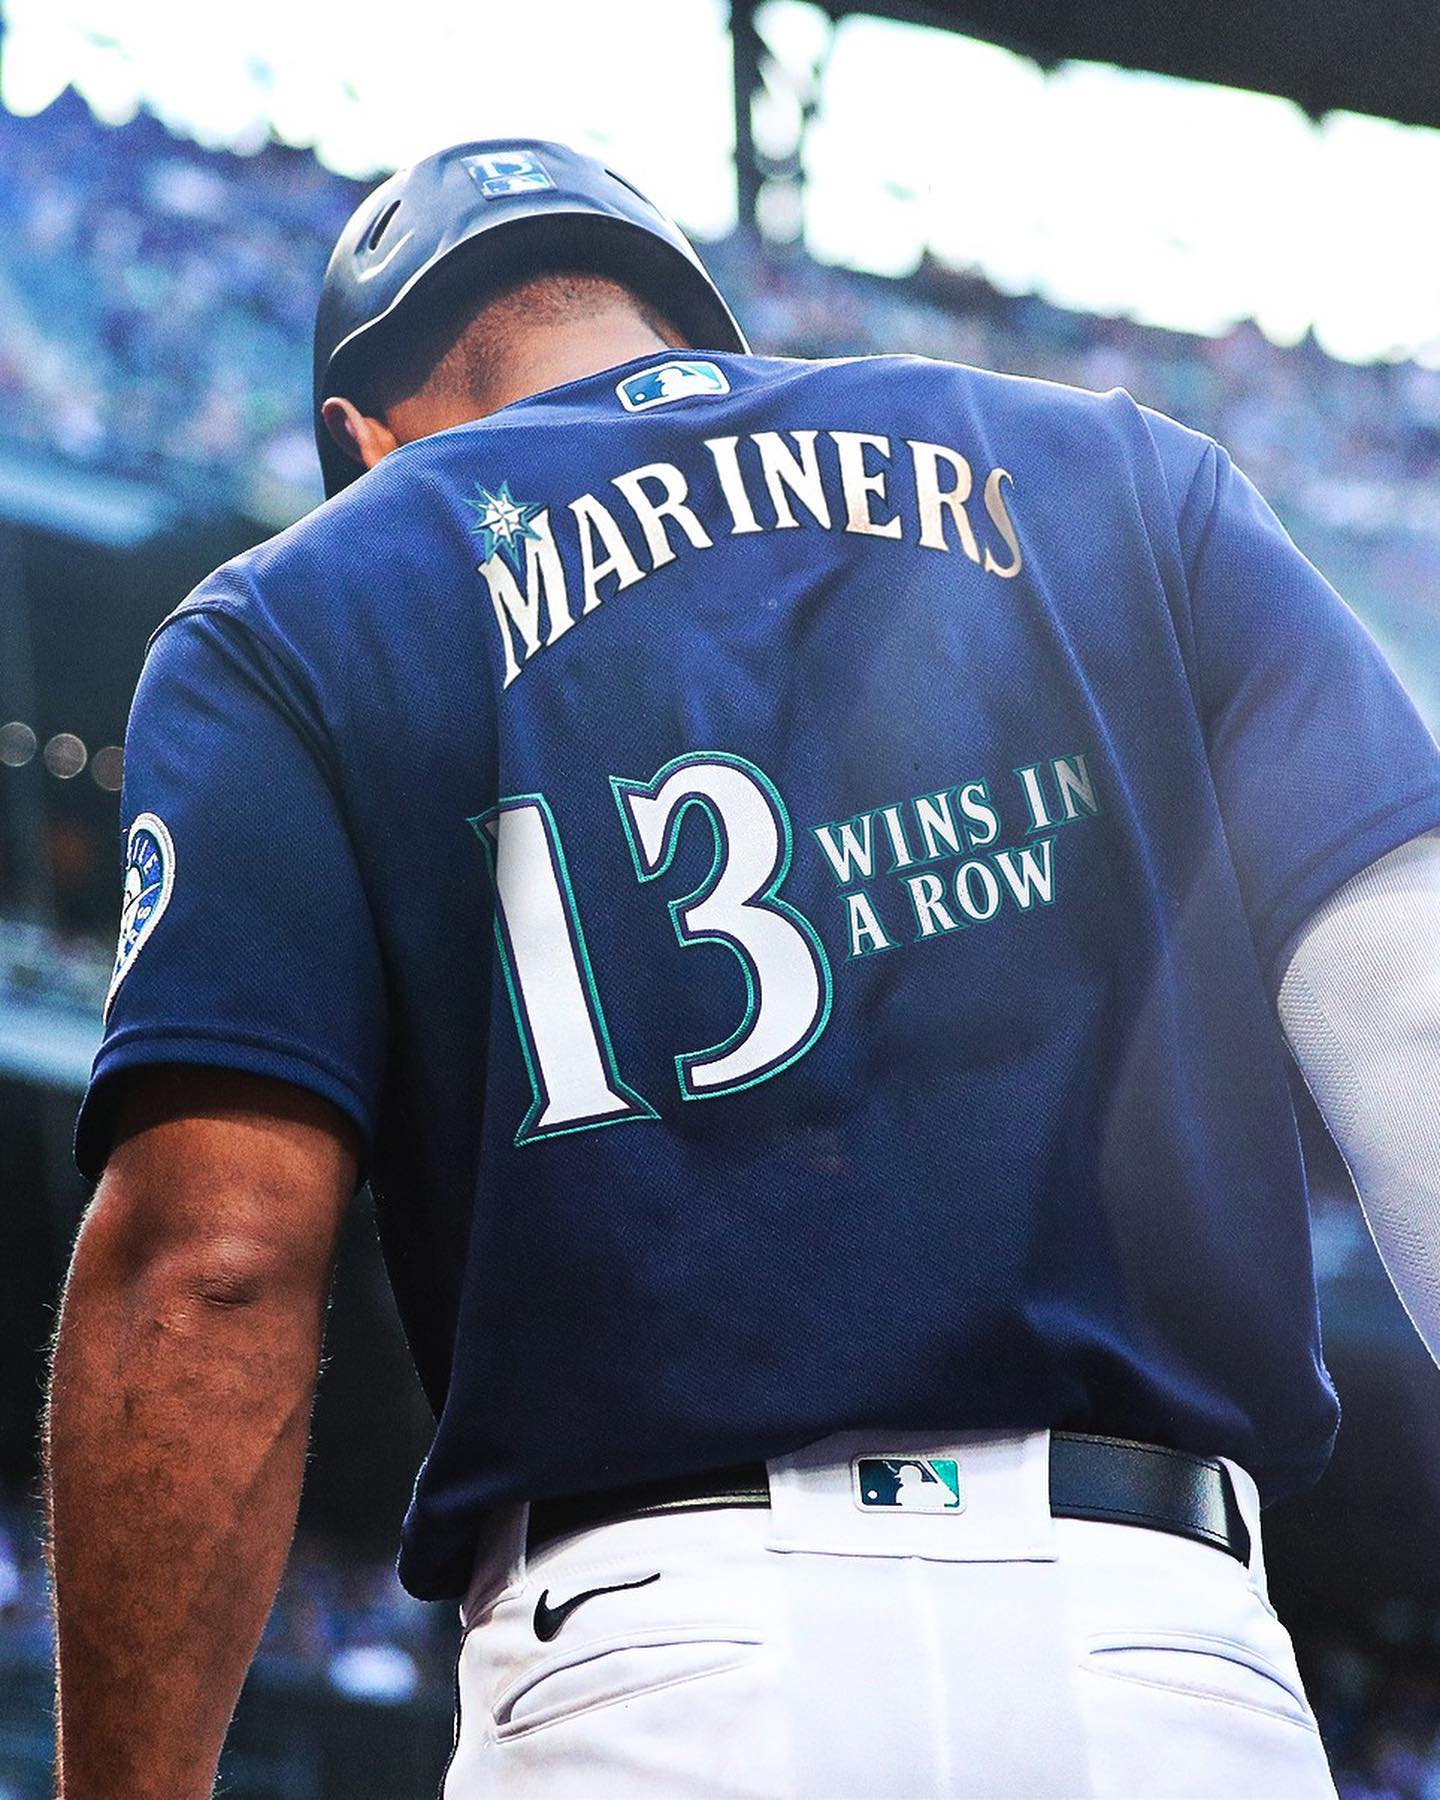 Lucky No. 13 for the @Mariners!...